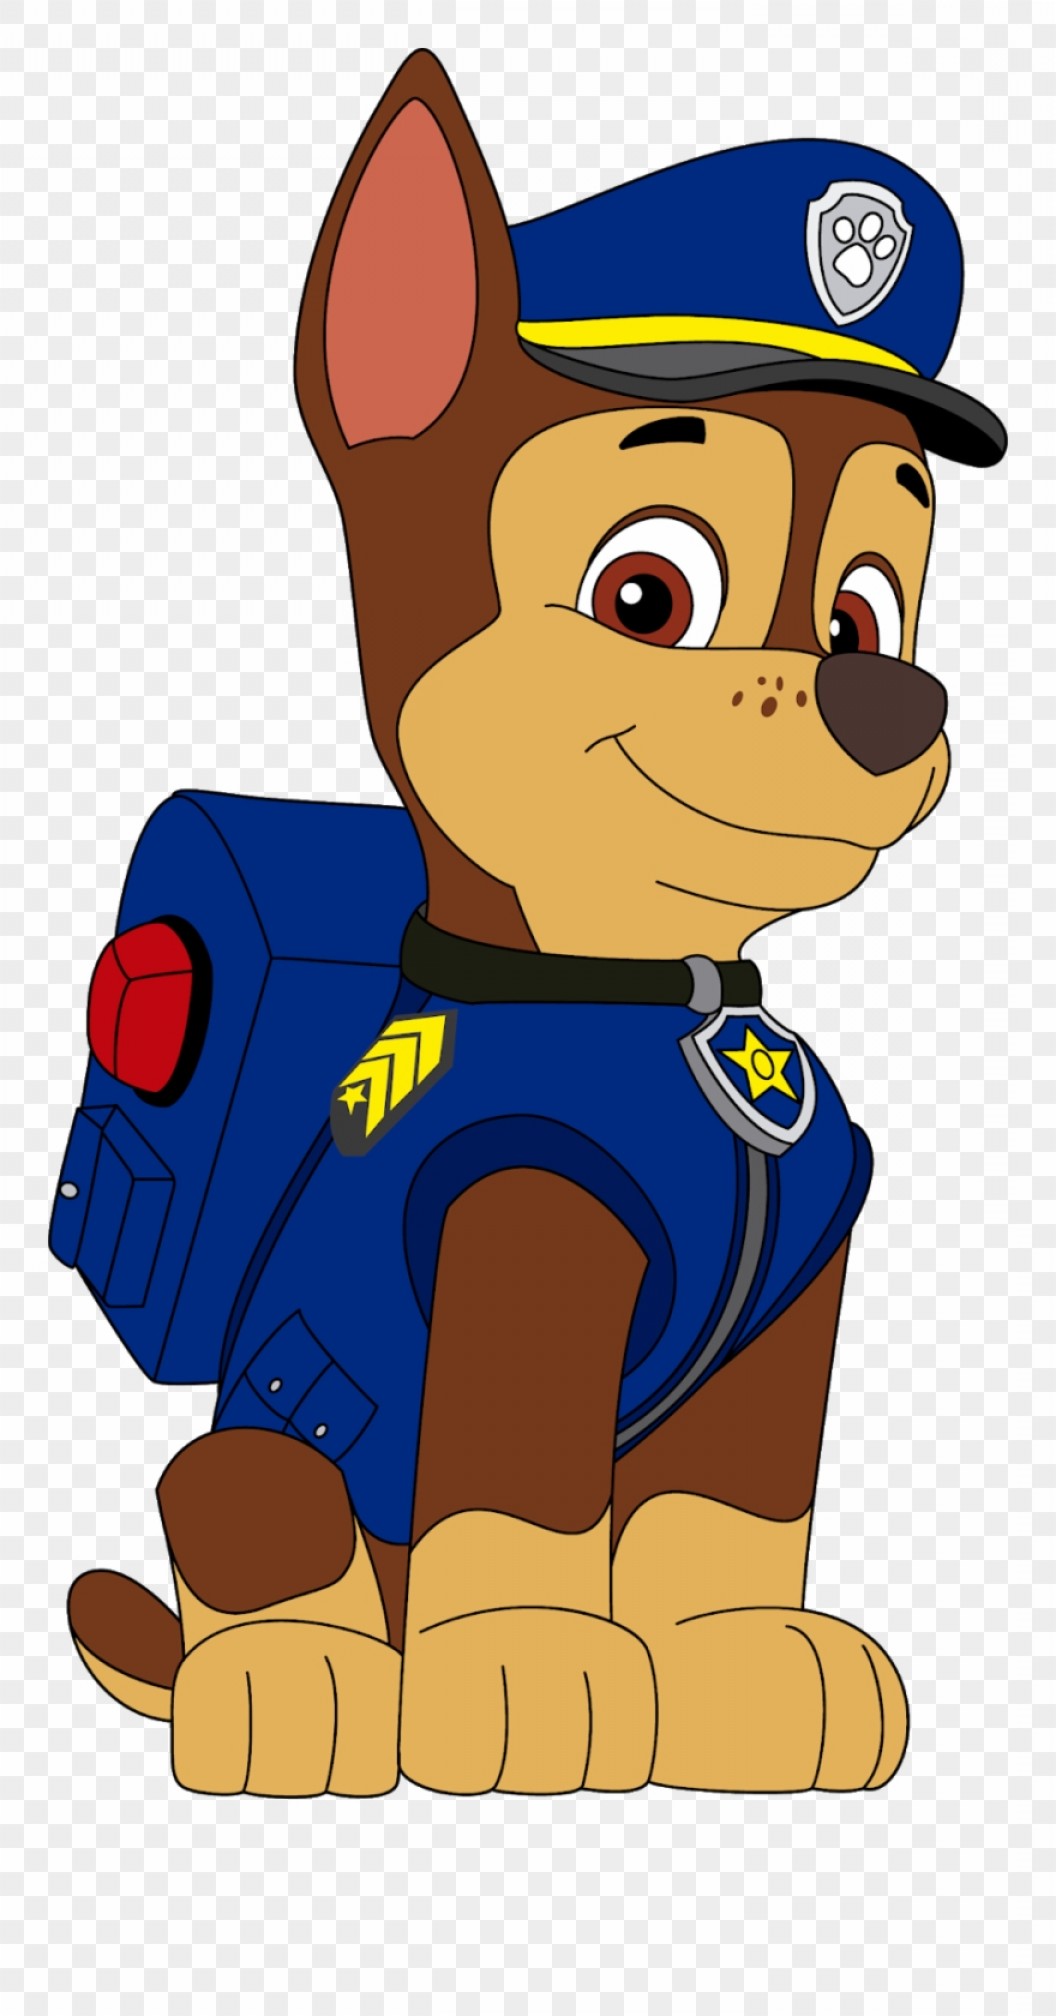 Download Paw Patrol Vector Images at Vectorified.com | Collection ...